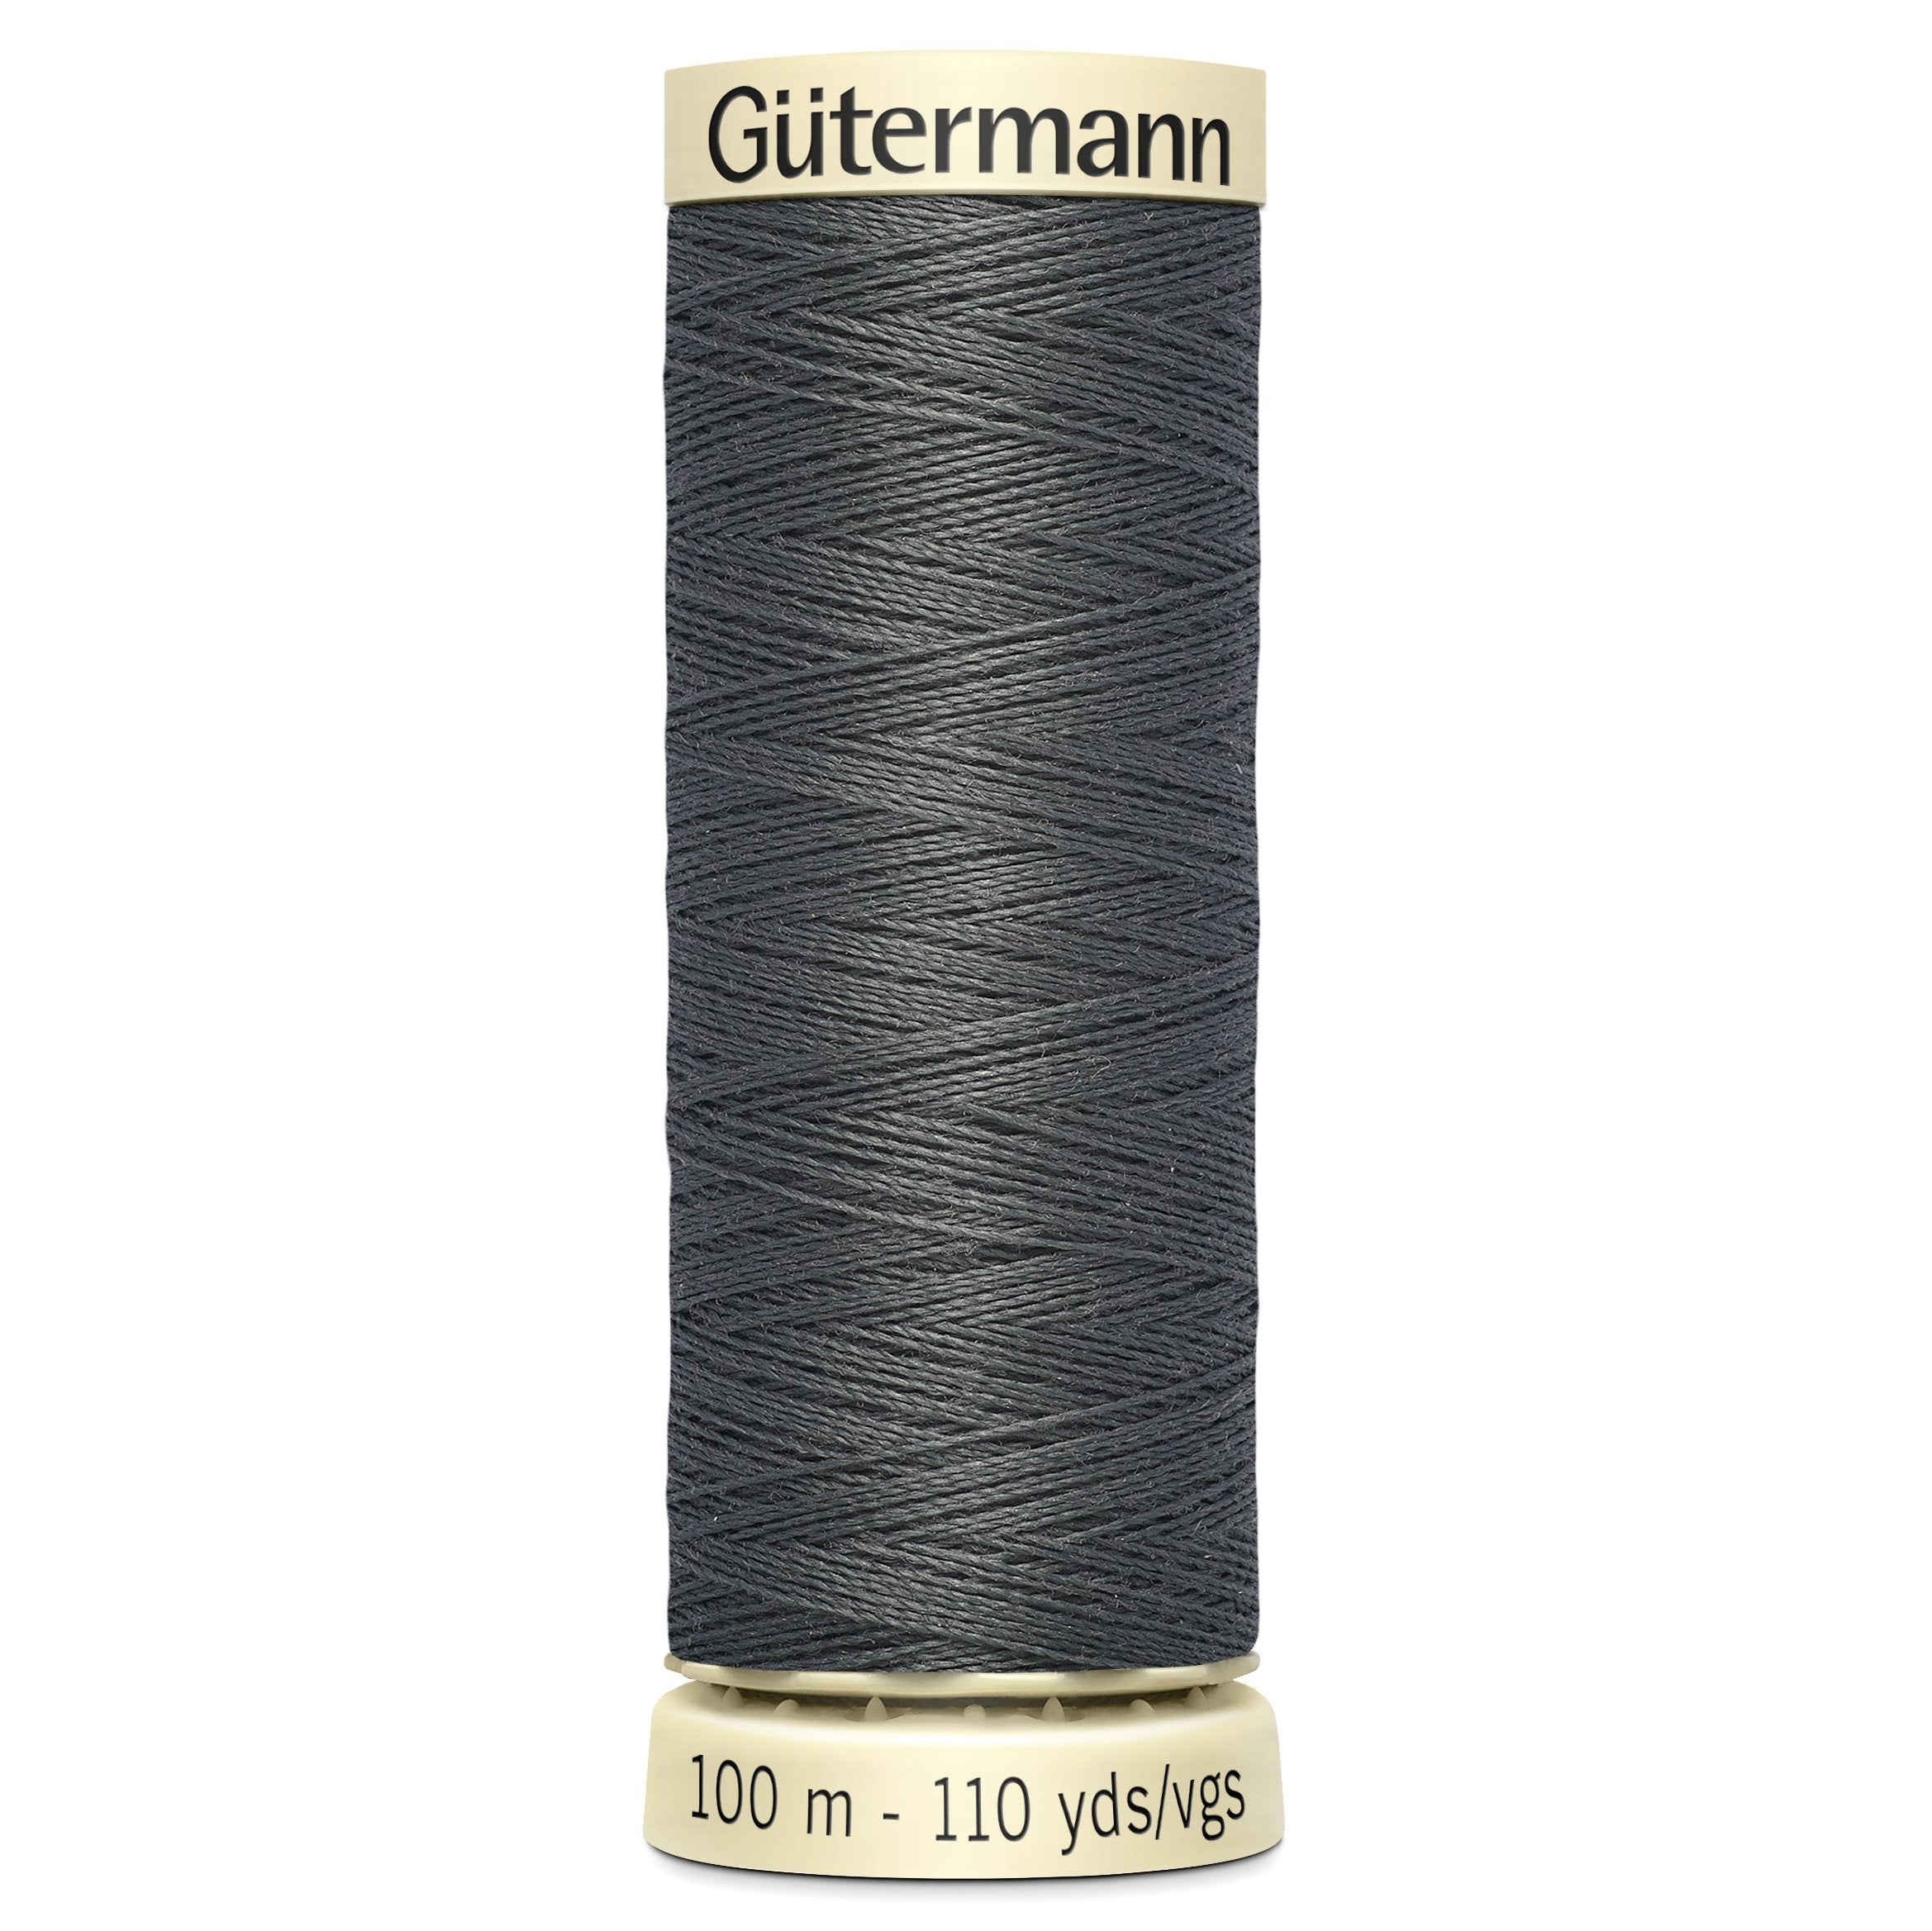 Gutermann Sew All Thread colour 702 Grey from Jaycotts Sewing Supplies